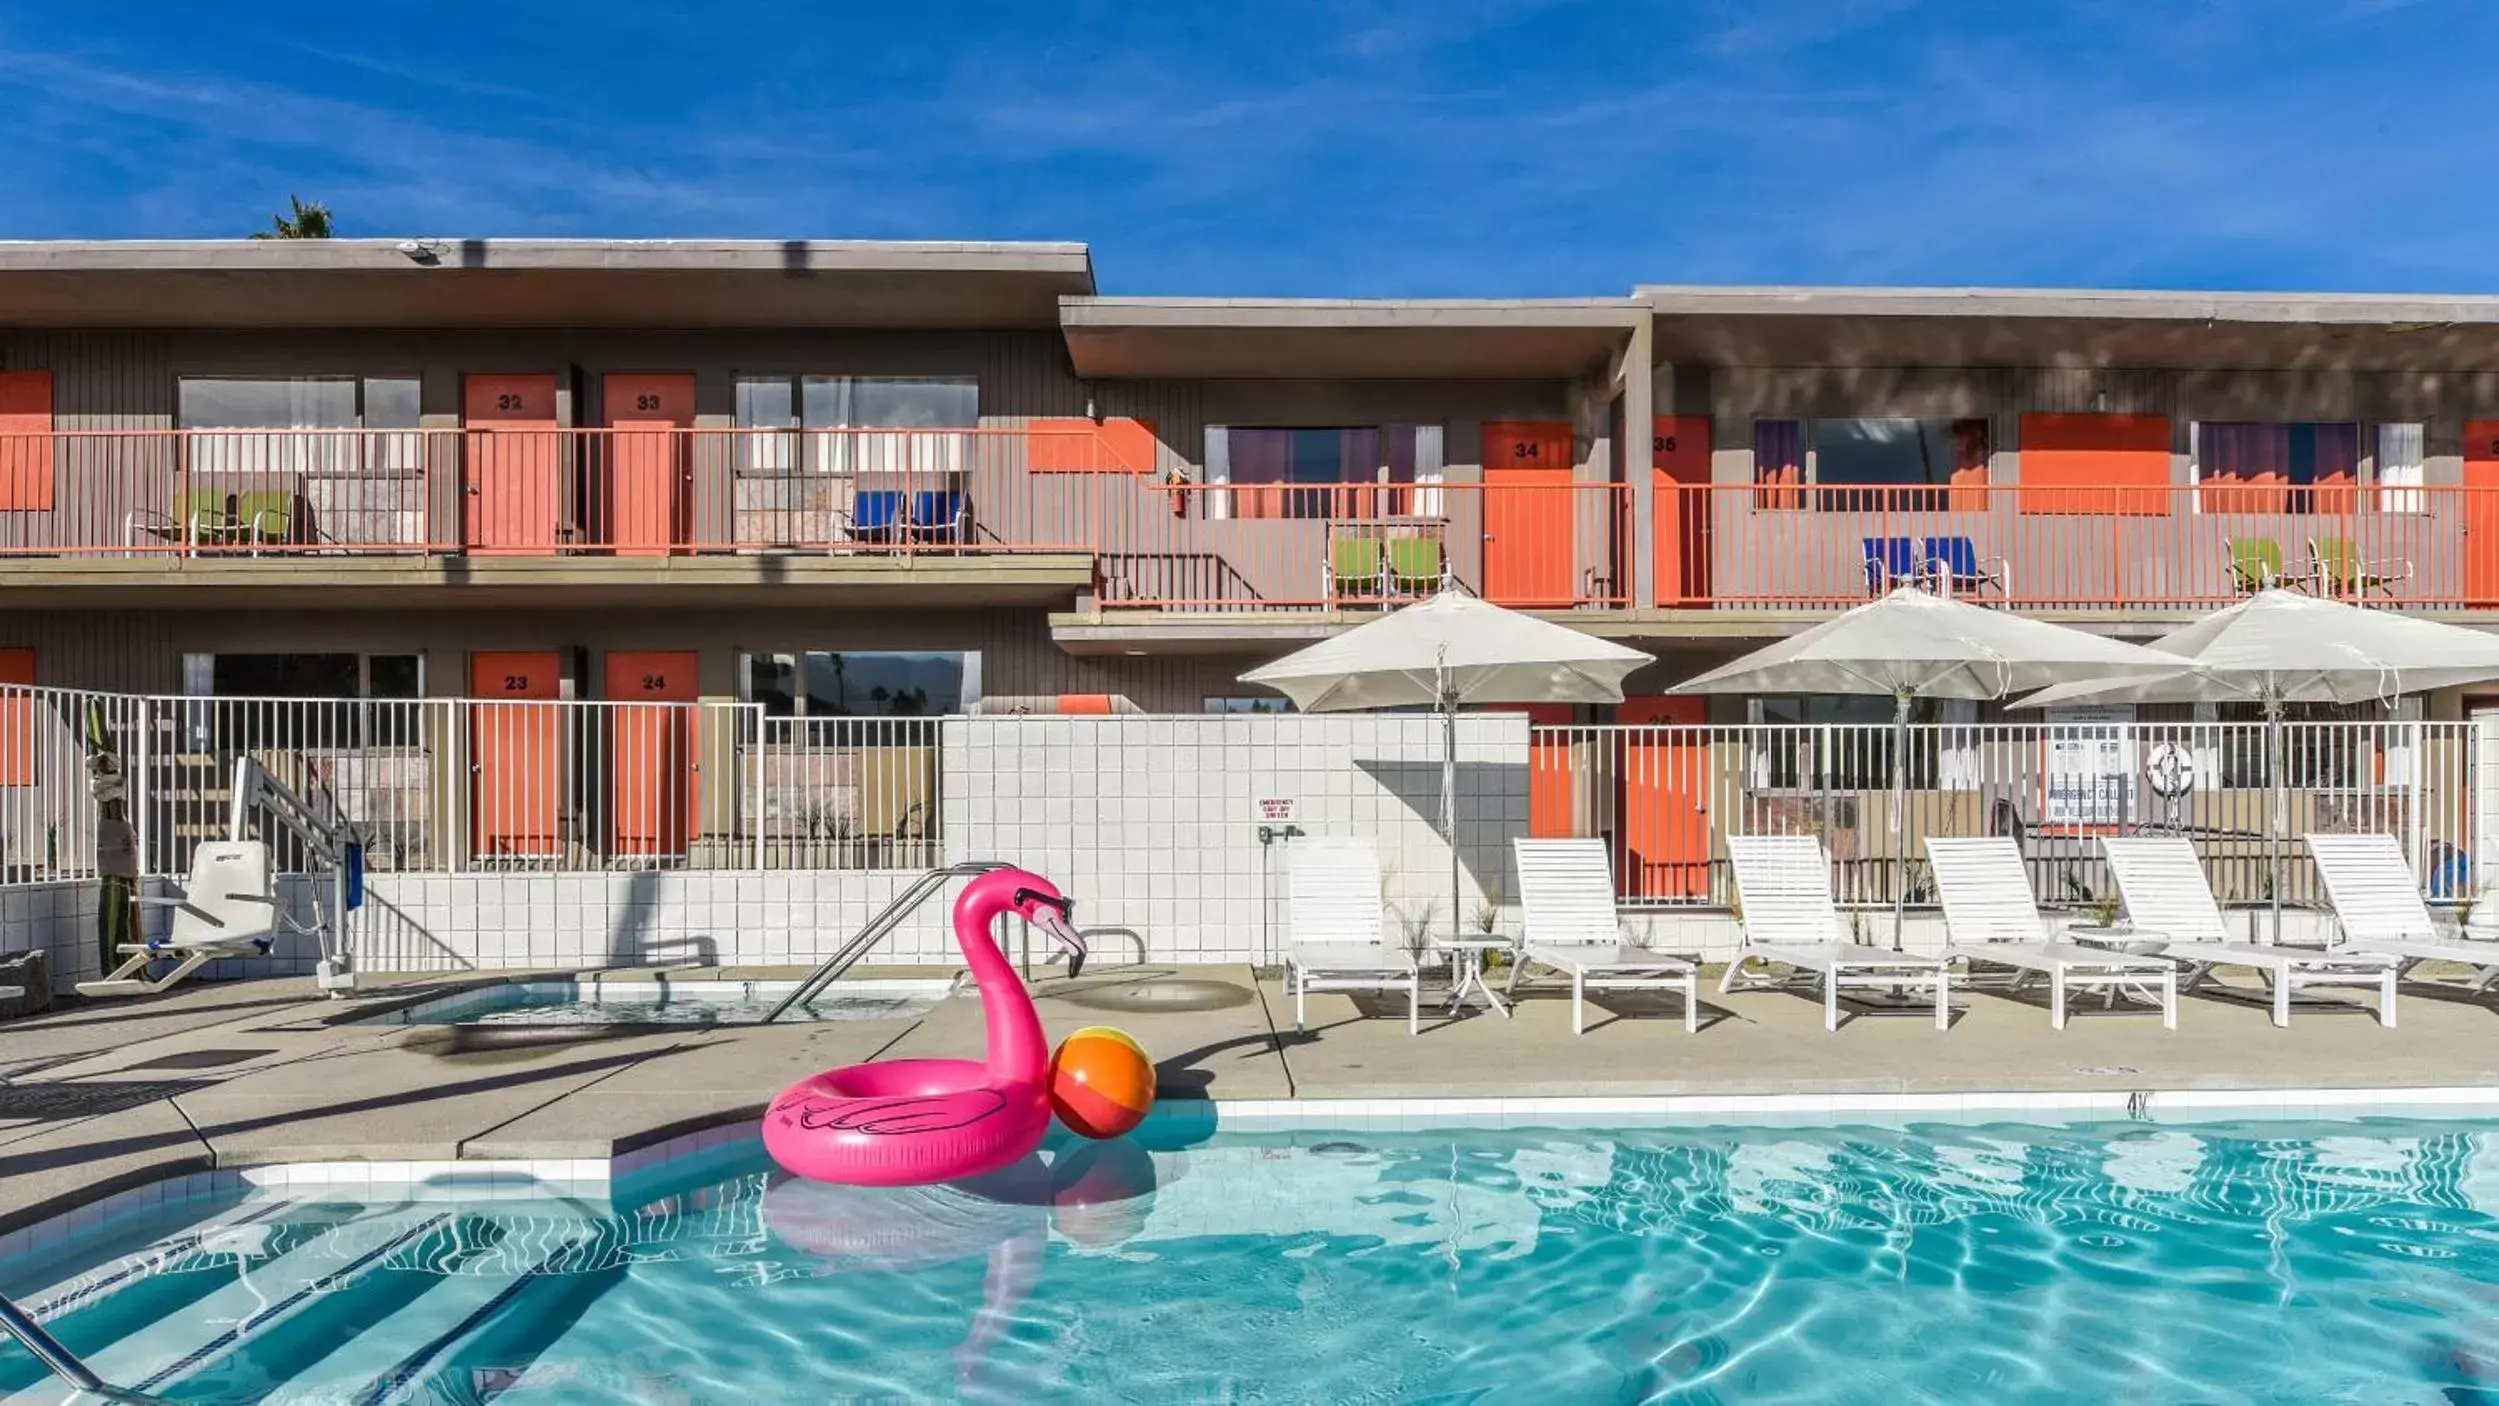 Property building, Swimming Pool in The Skylark, a Palm Springs Hotel